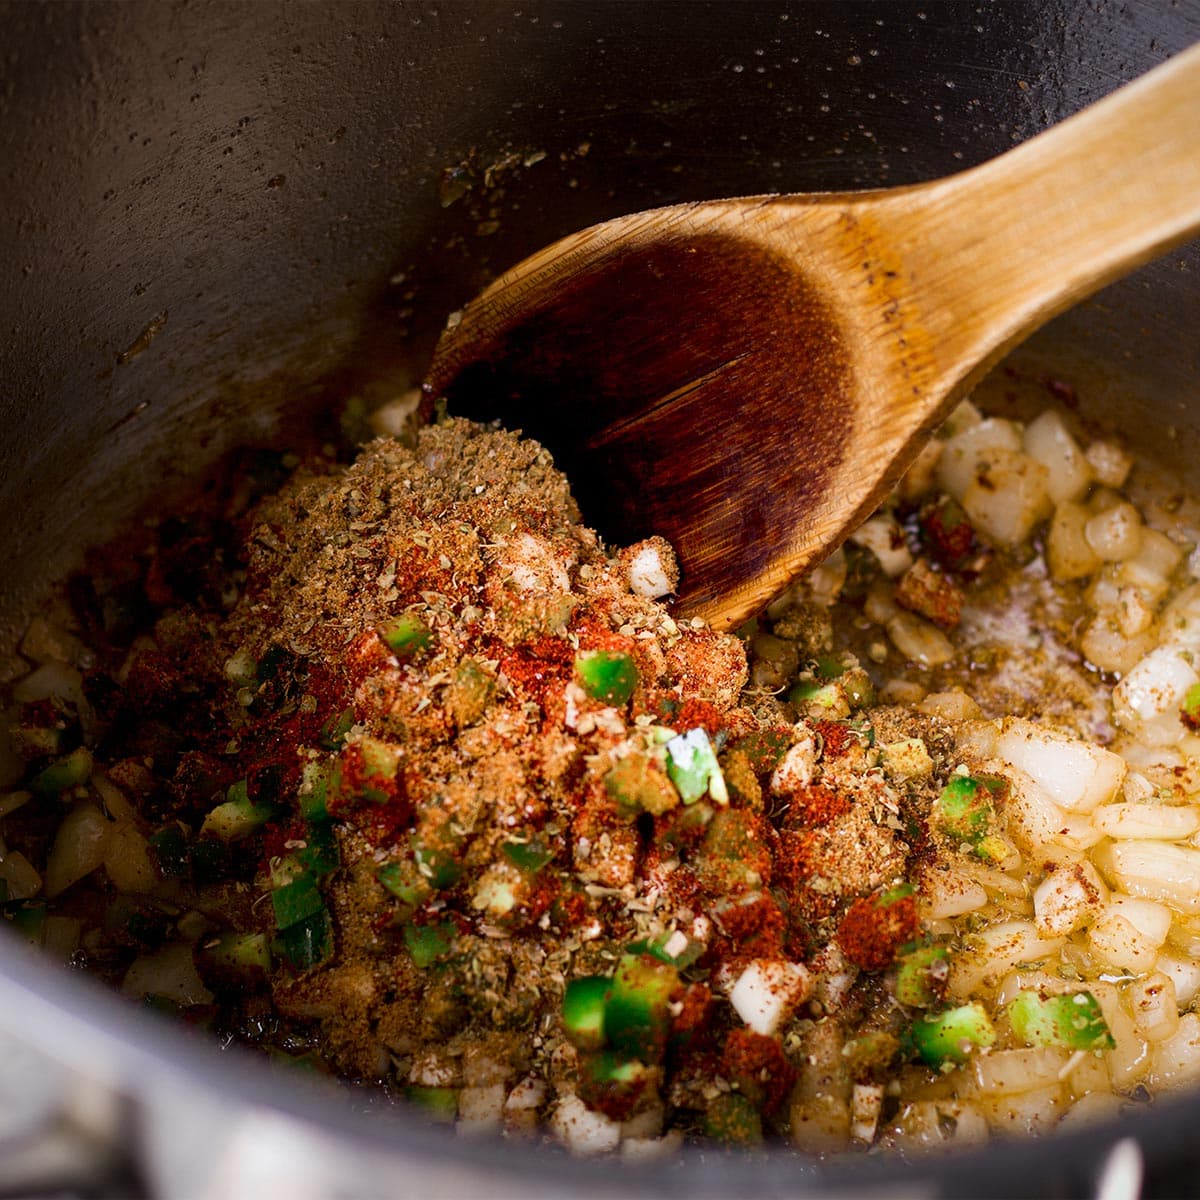 Using a wooden spoon to stir garlic, jalapeño, chili powder, cumin, and oregano into onions cooking in a saucepan.